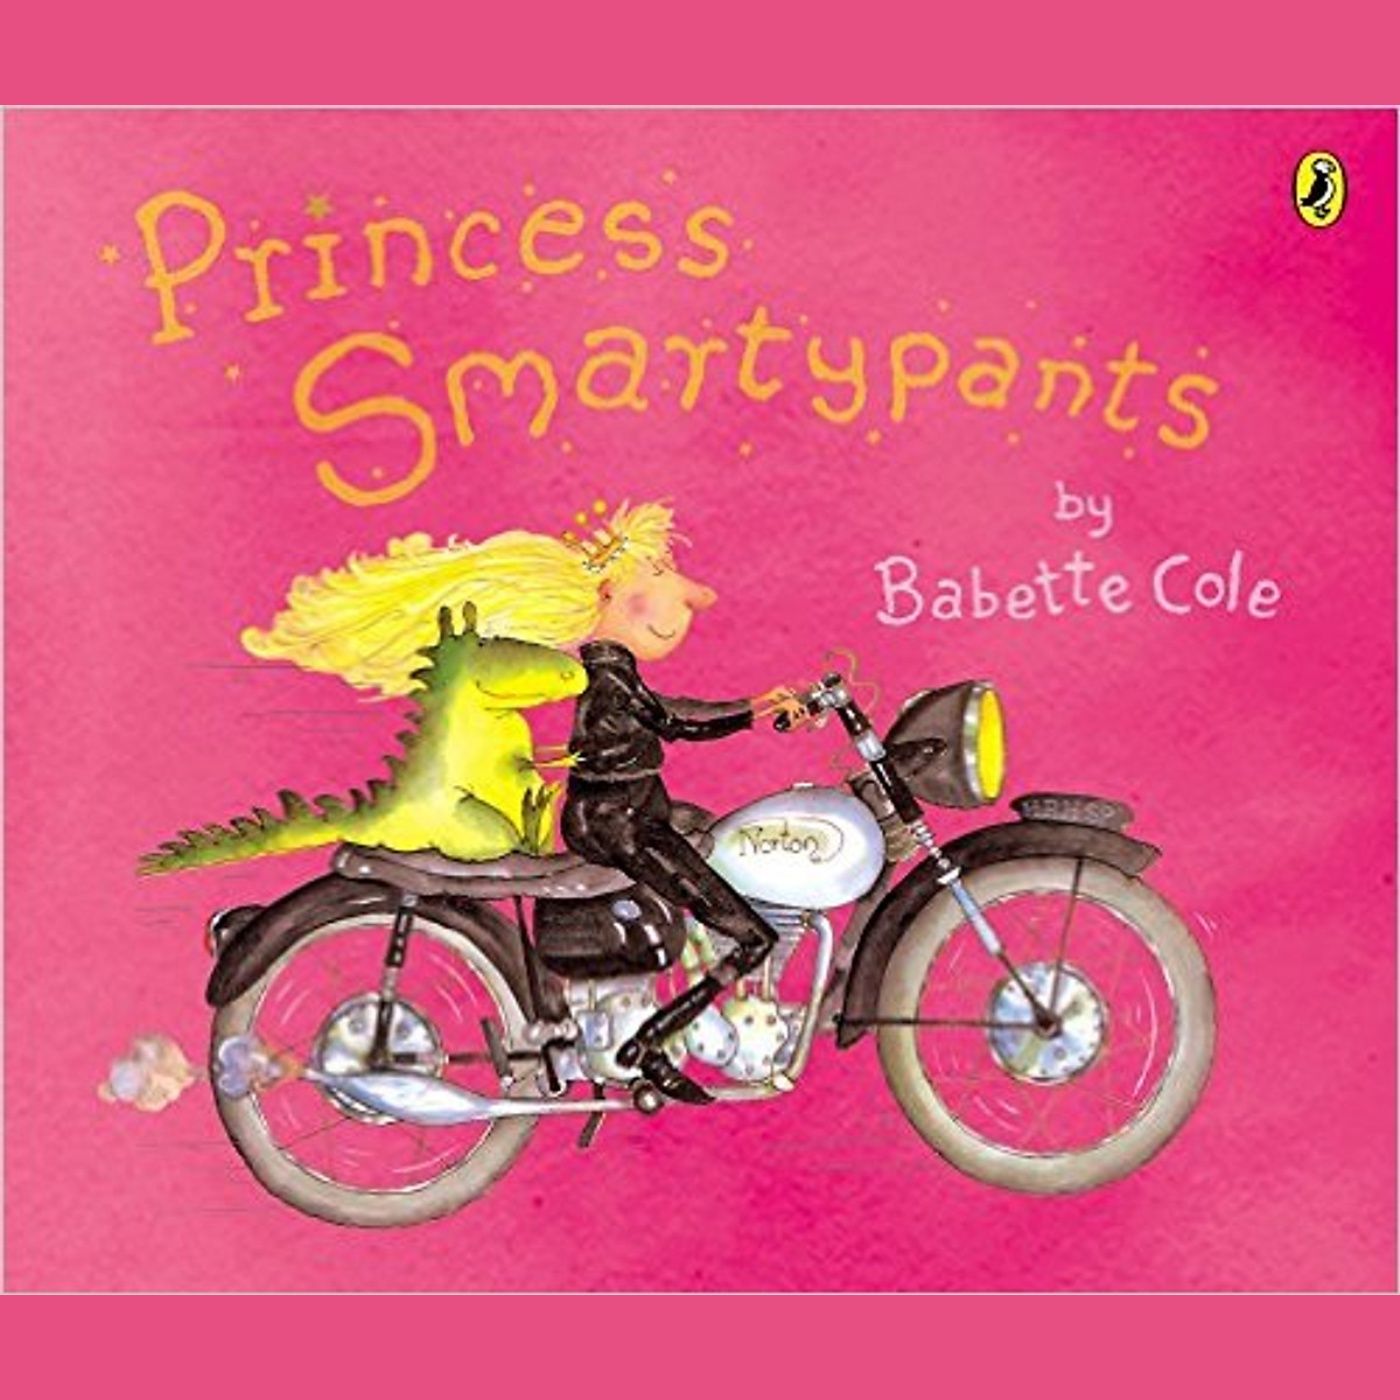 Princess Smartypants by Babette Cole - Read by Martyn Kenneth